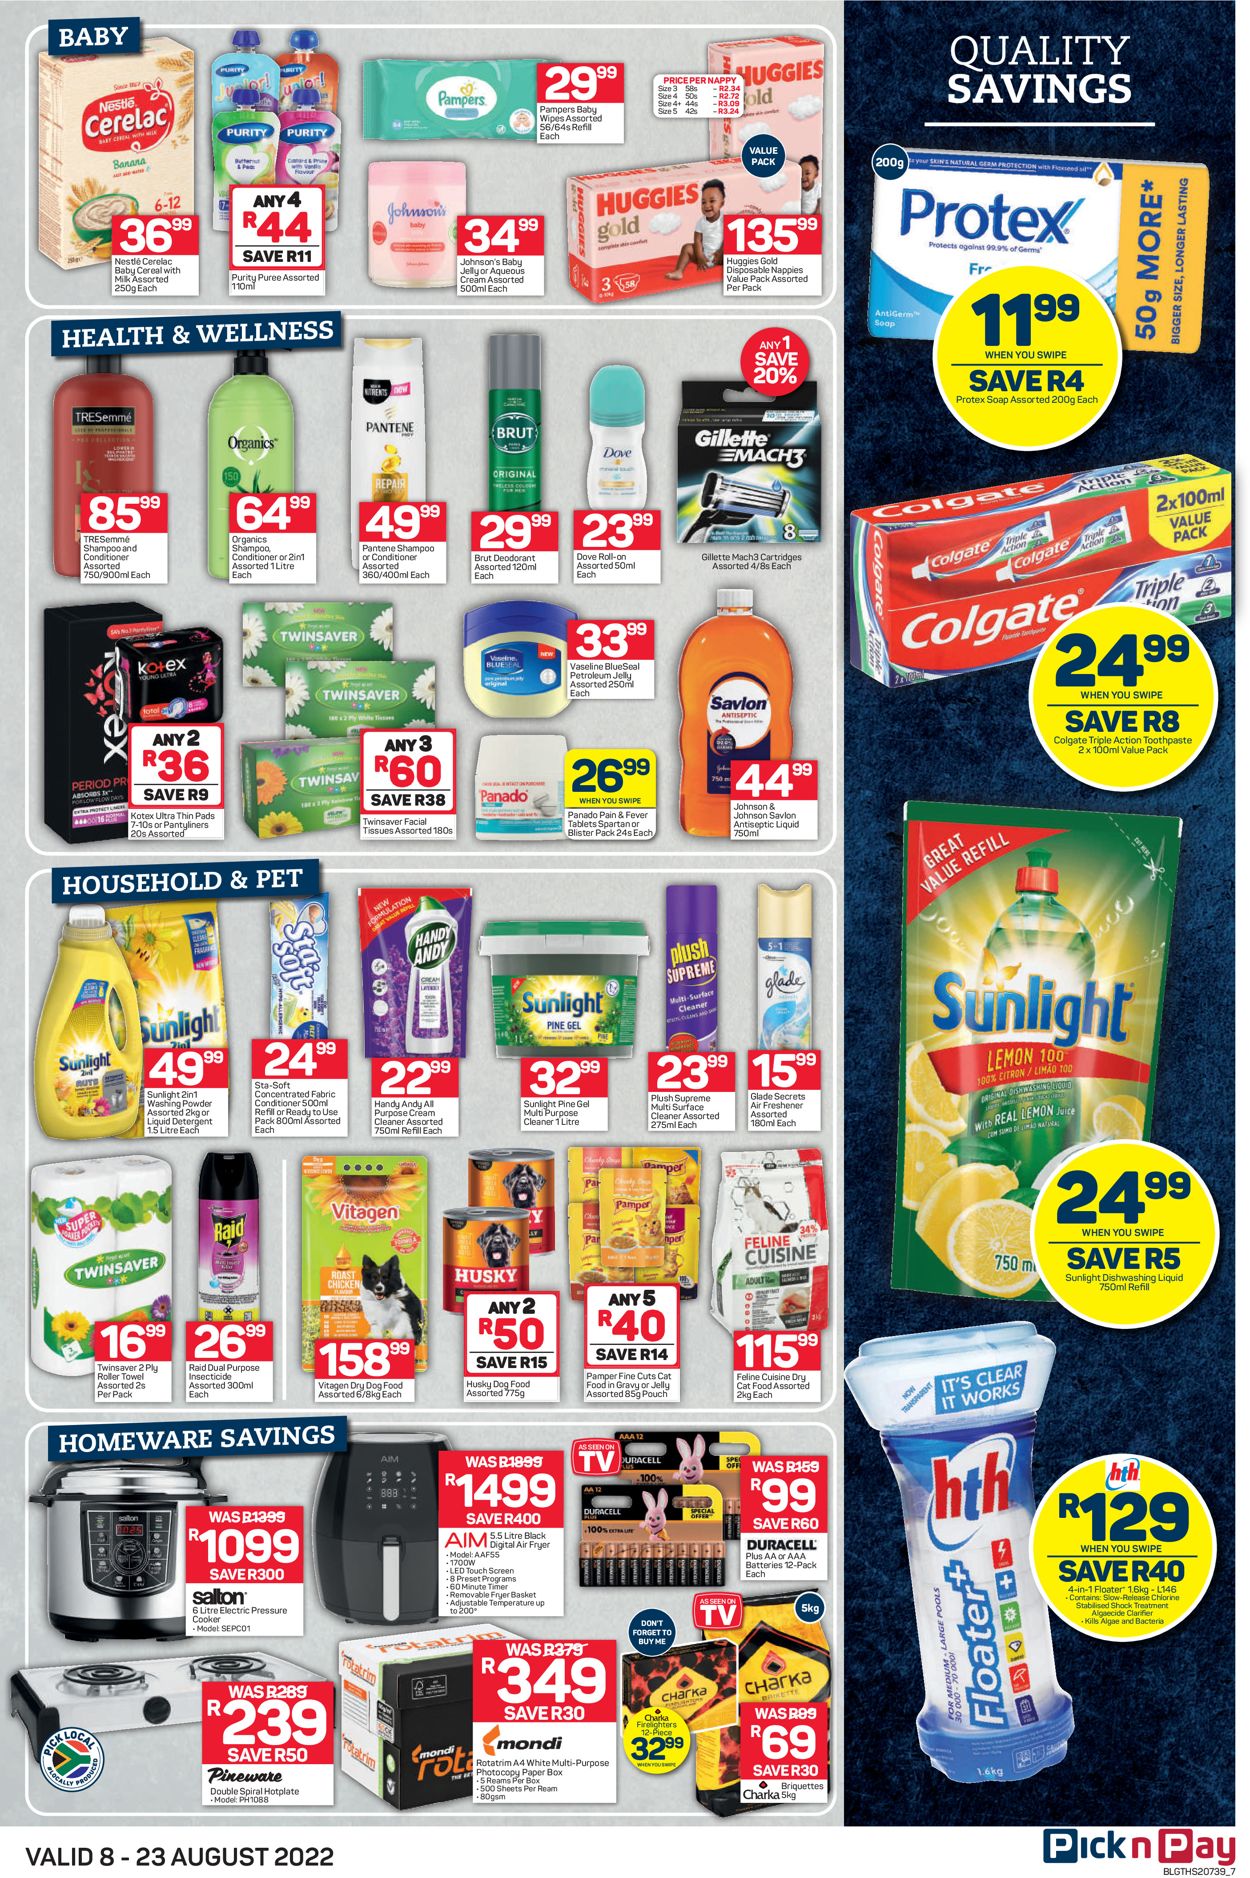 Pick n Pay Catalogue - 2022/08/08-2022/08/23 (Page 7)